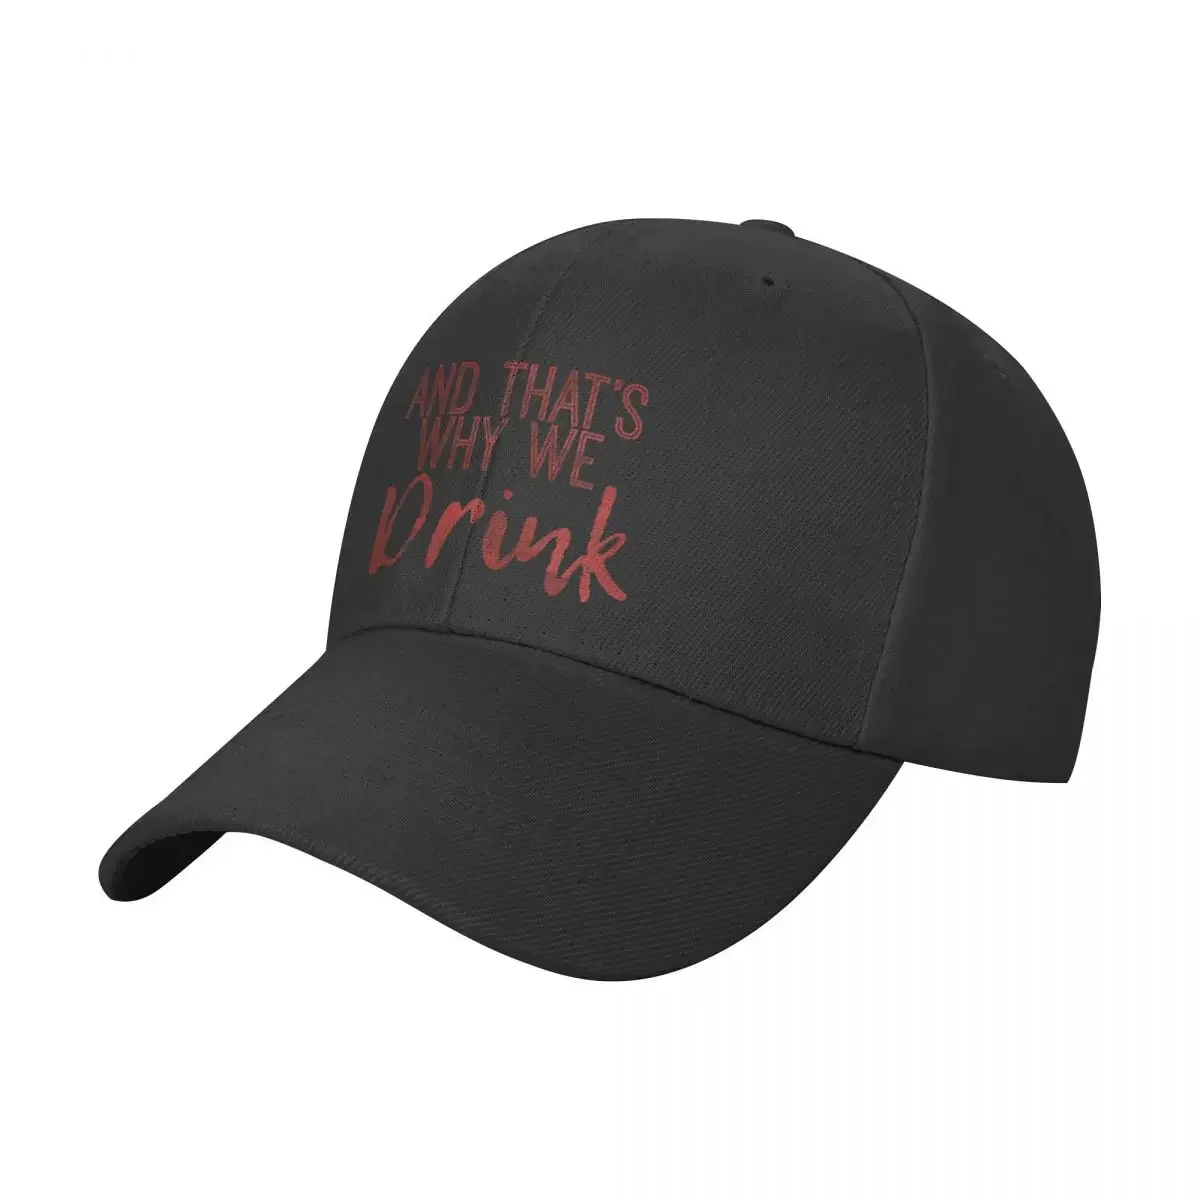 

And That's Why We Drink Baseball Cap Vintage custom Hat Sun Hats For Women Men's